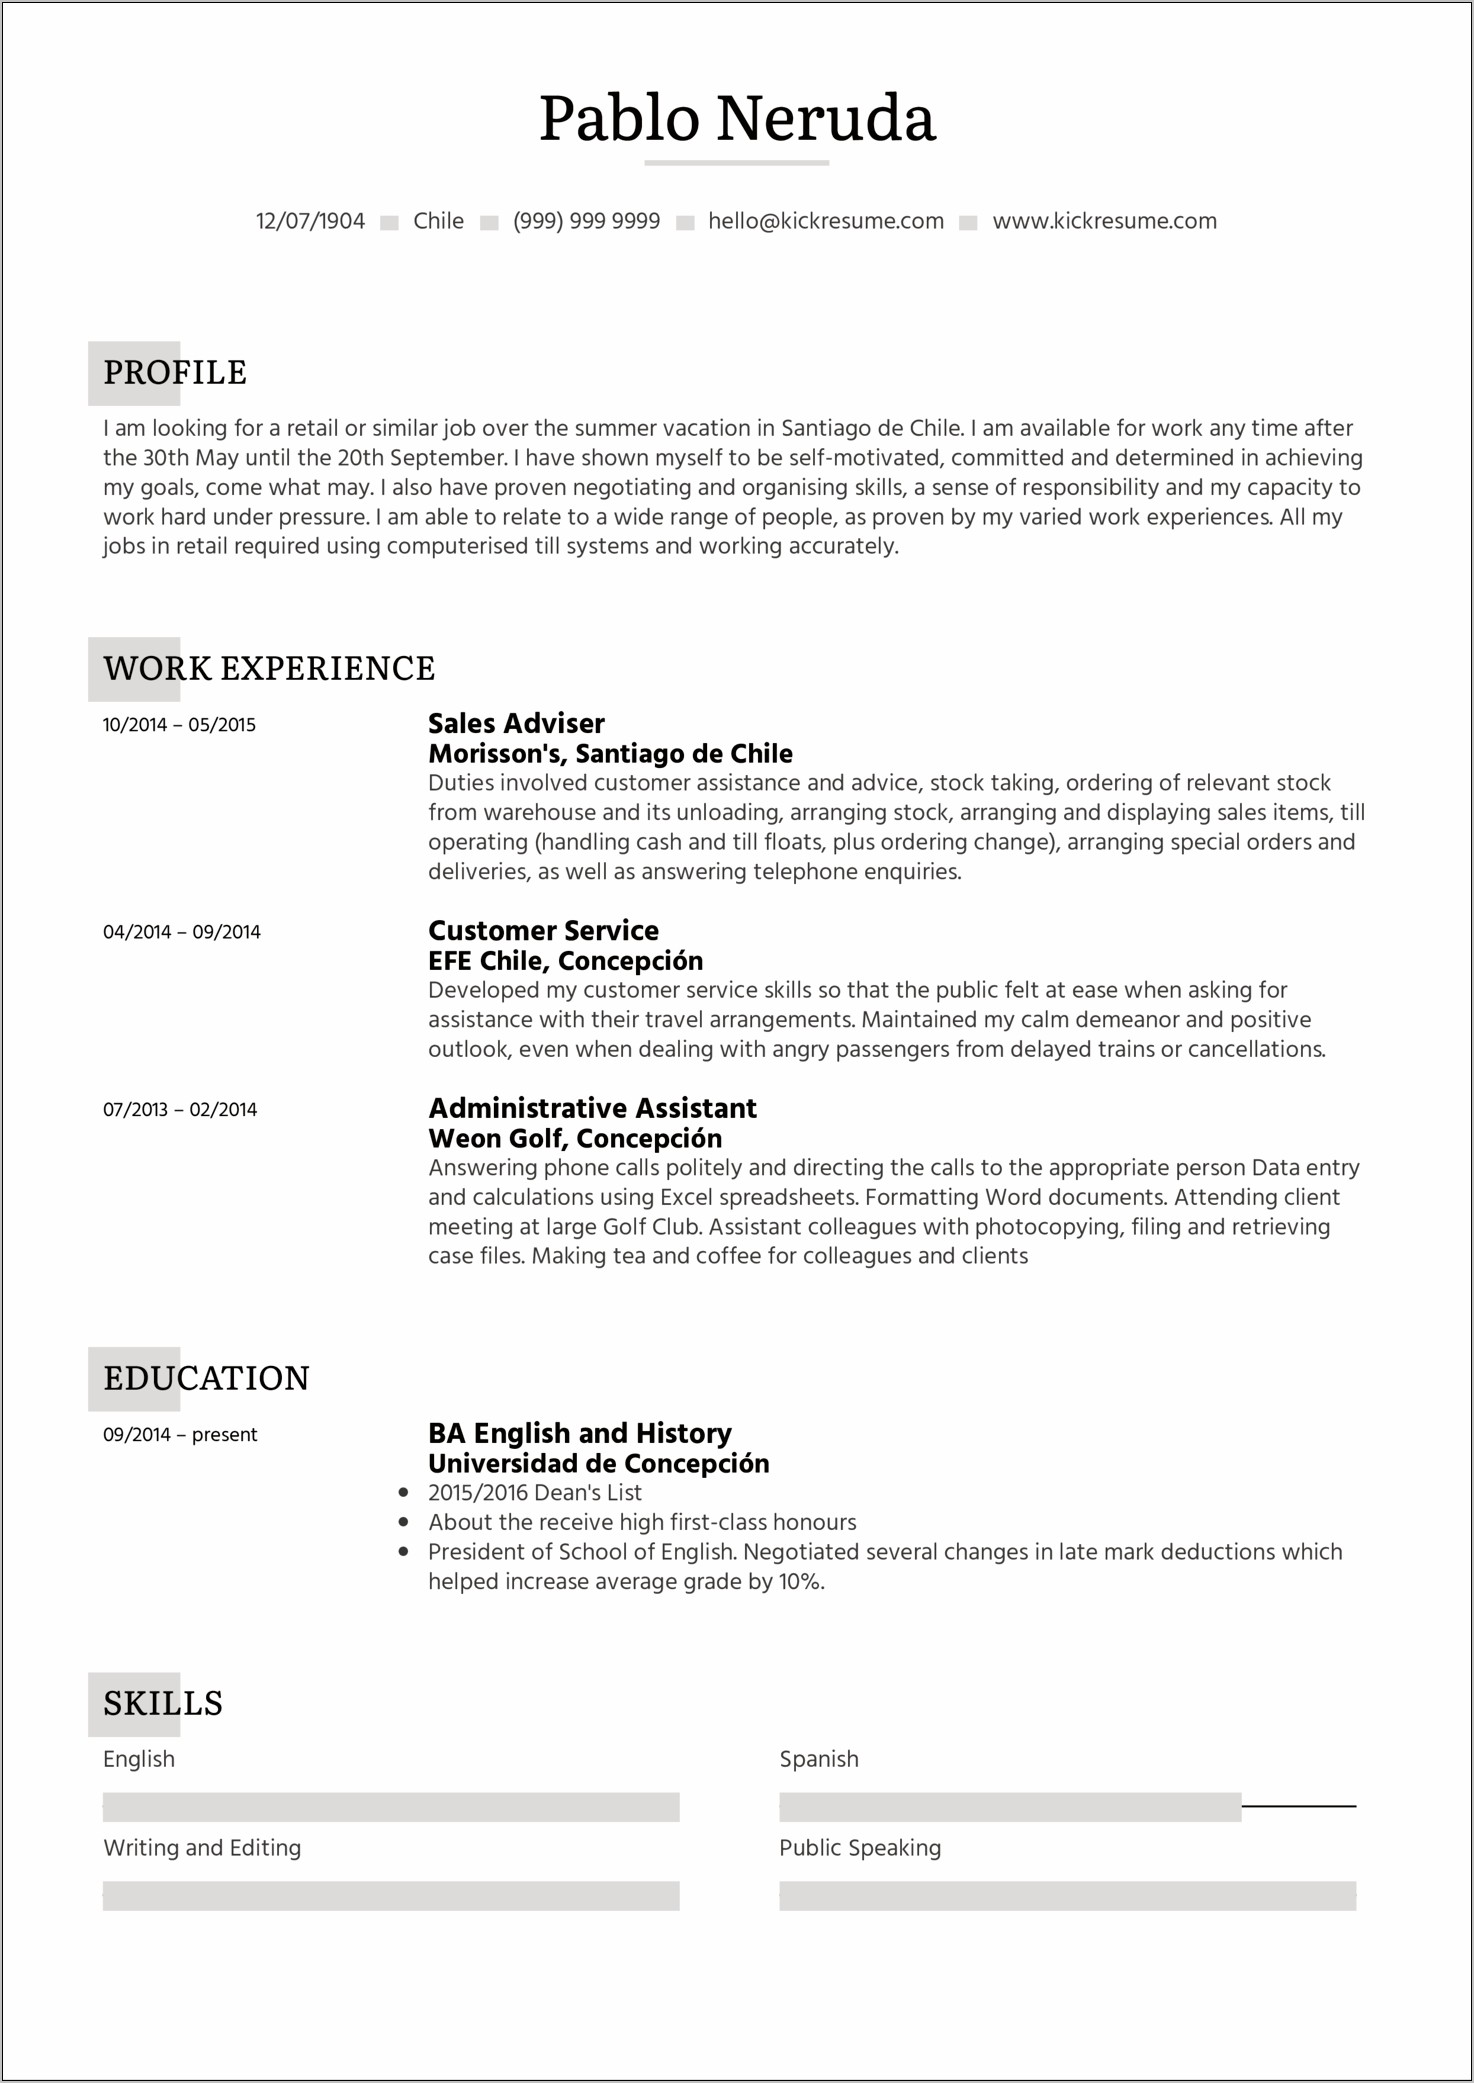 Sample Resume For Students With Work Experience